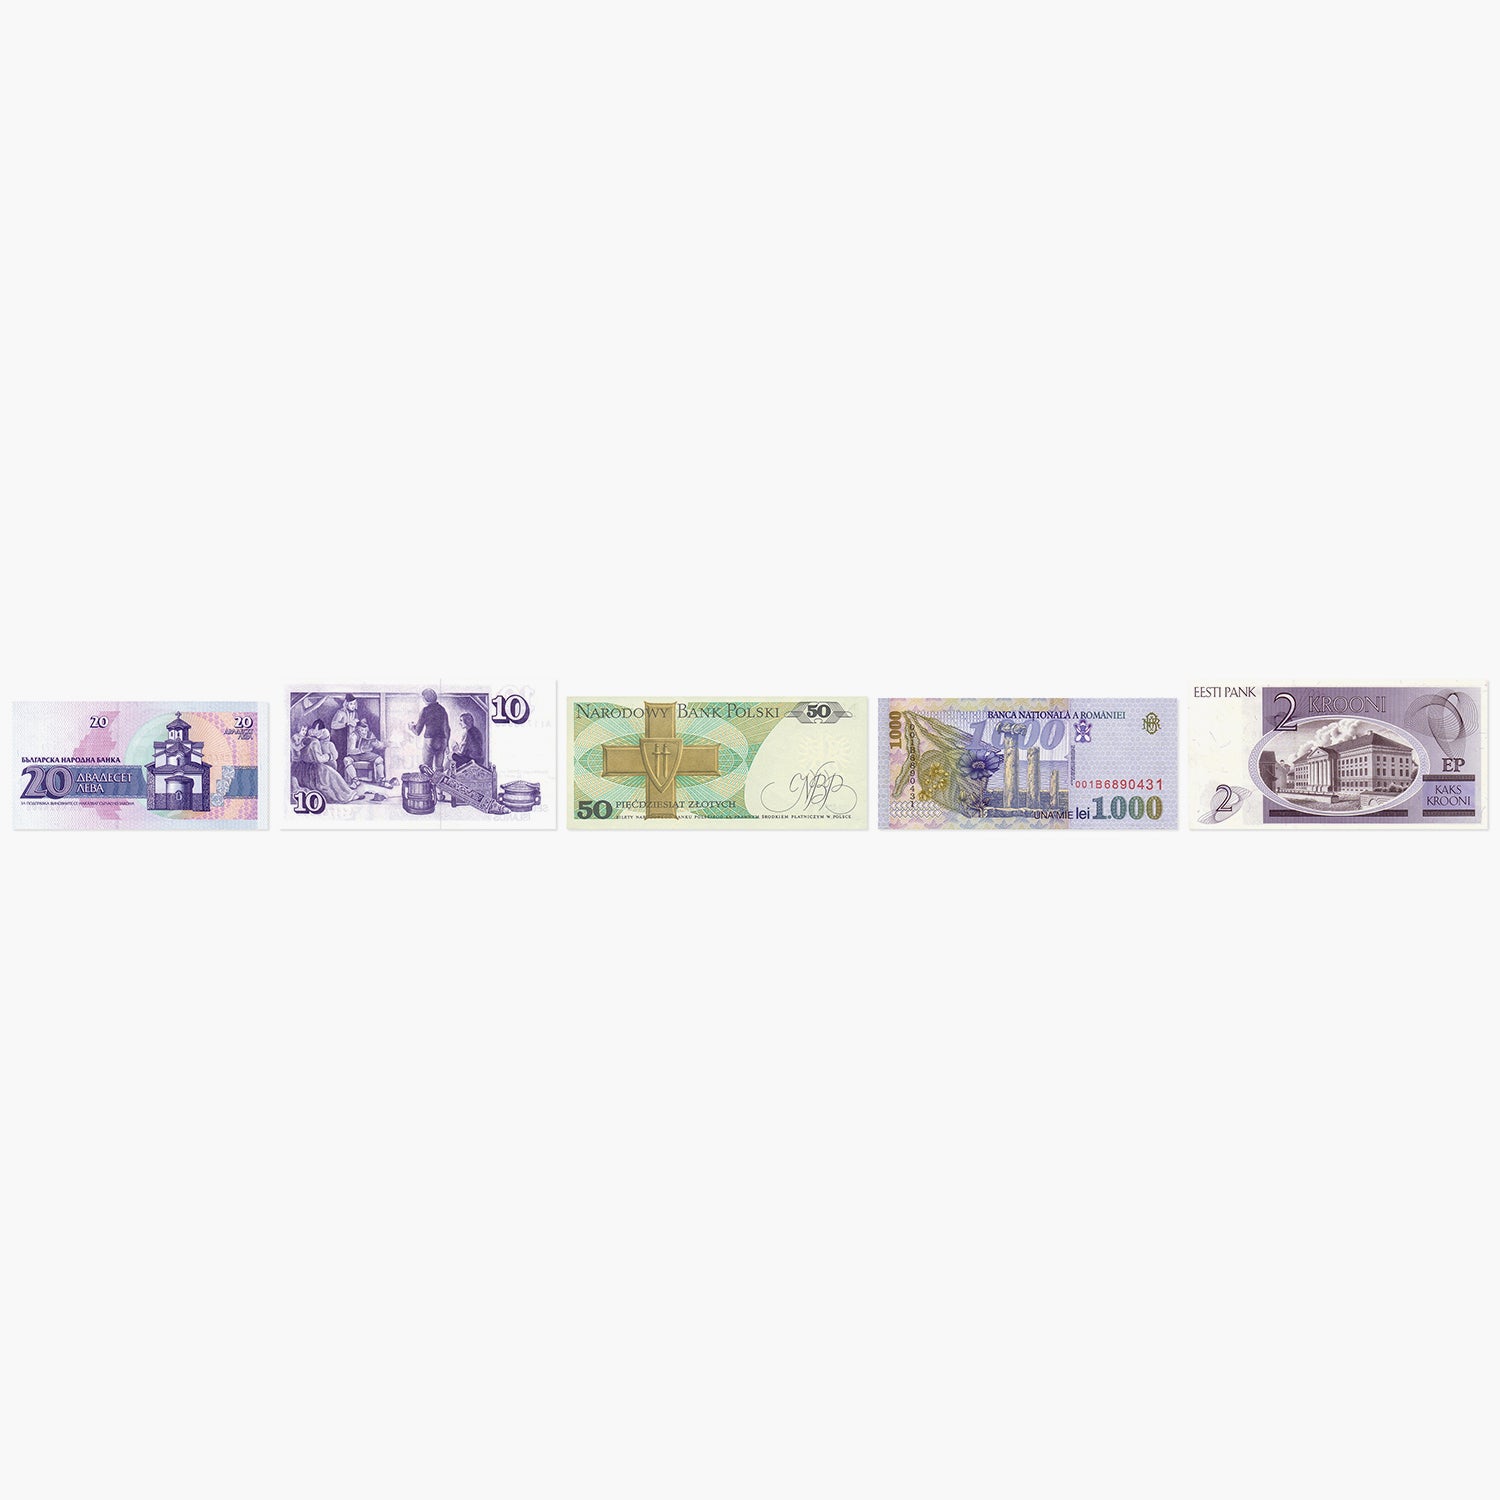 Banknote Collection "Europe"